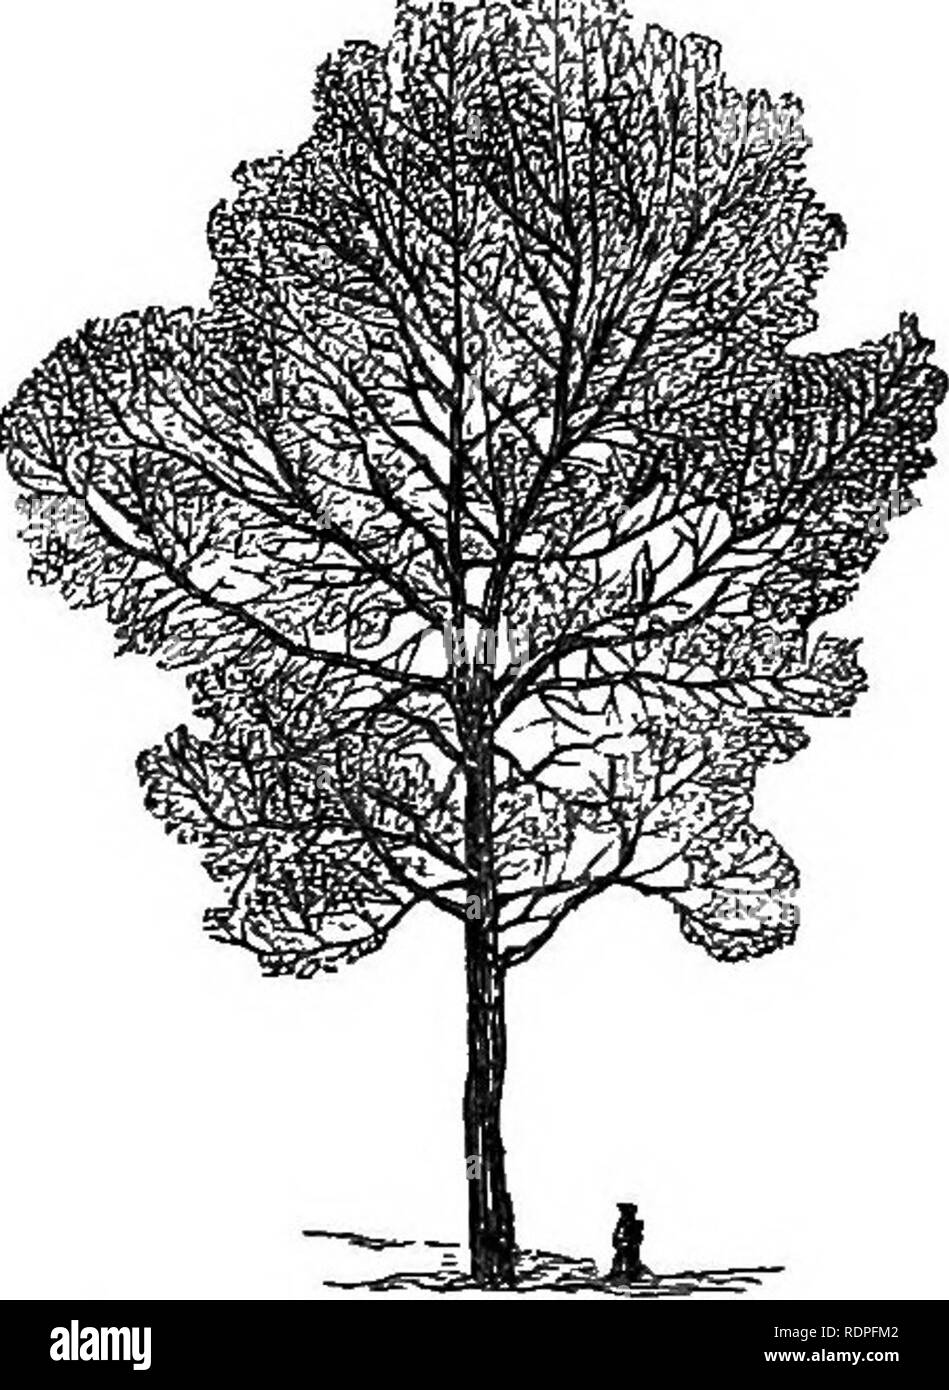 . My garden, its plan and culture together with a general description of its geology, botany, and natural history. Gardening. Fig. 933.—Elm. Fig. 934.—Black Italian Poplar. Fig. 934 «.—Lombardy Poplar. Next to the Elm, the Black Italian Poplar {Populus monilifera, fig- 934) takes a prominent place. It grows perhaps the most rapidly of all trees, and is a desirable one to shut out unsightly objects. Very tall trees of this species grow on the south side of the river, and these now overshadow the south-west part of my garden. The Black Italian Poplar tree is not a favourite of mine, as the branc Stock Photo